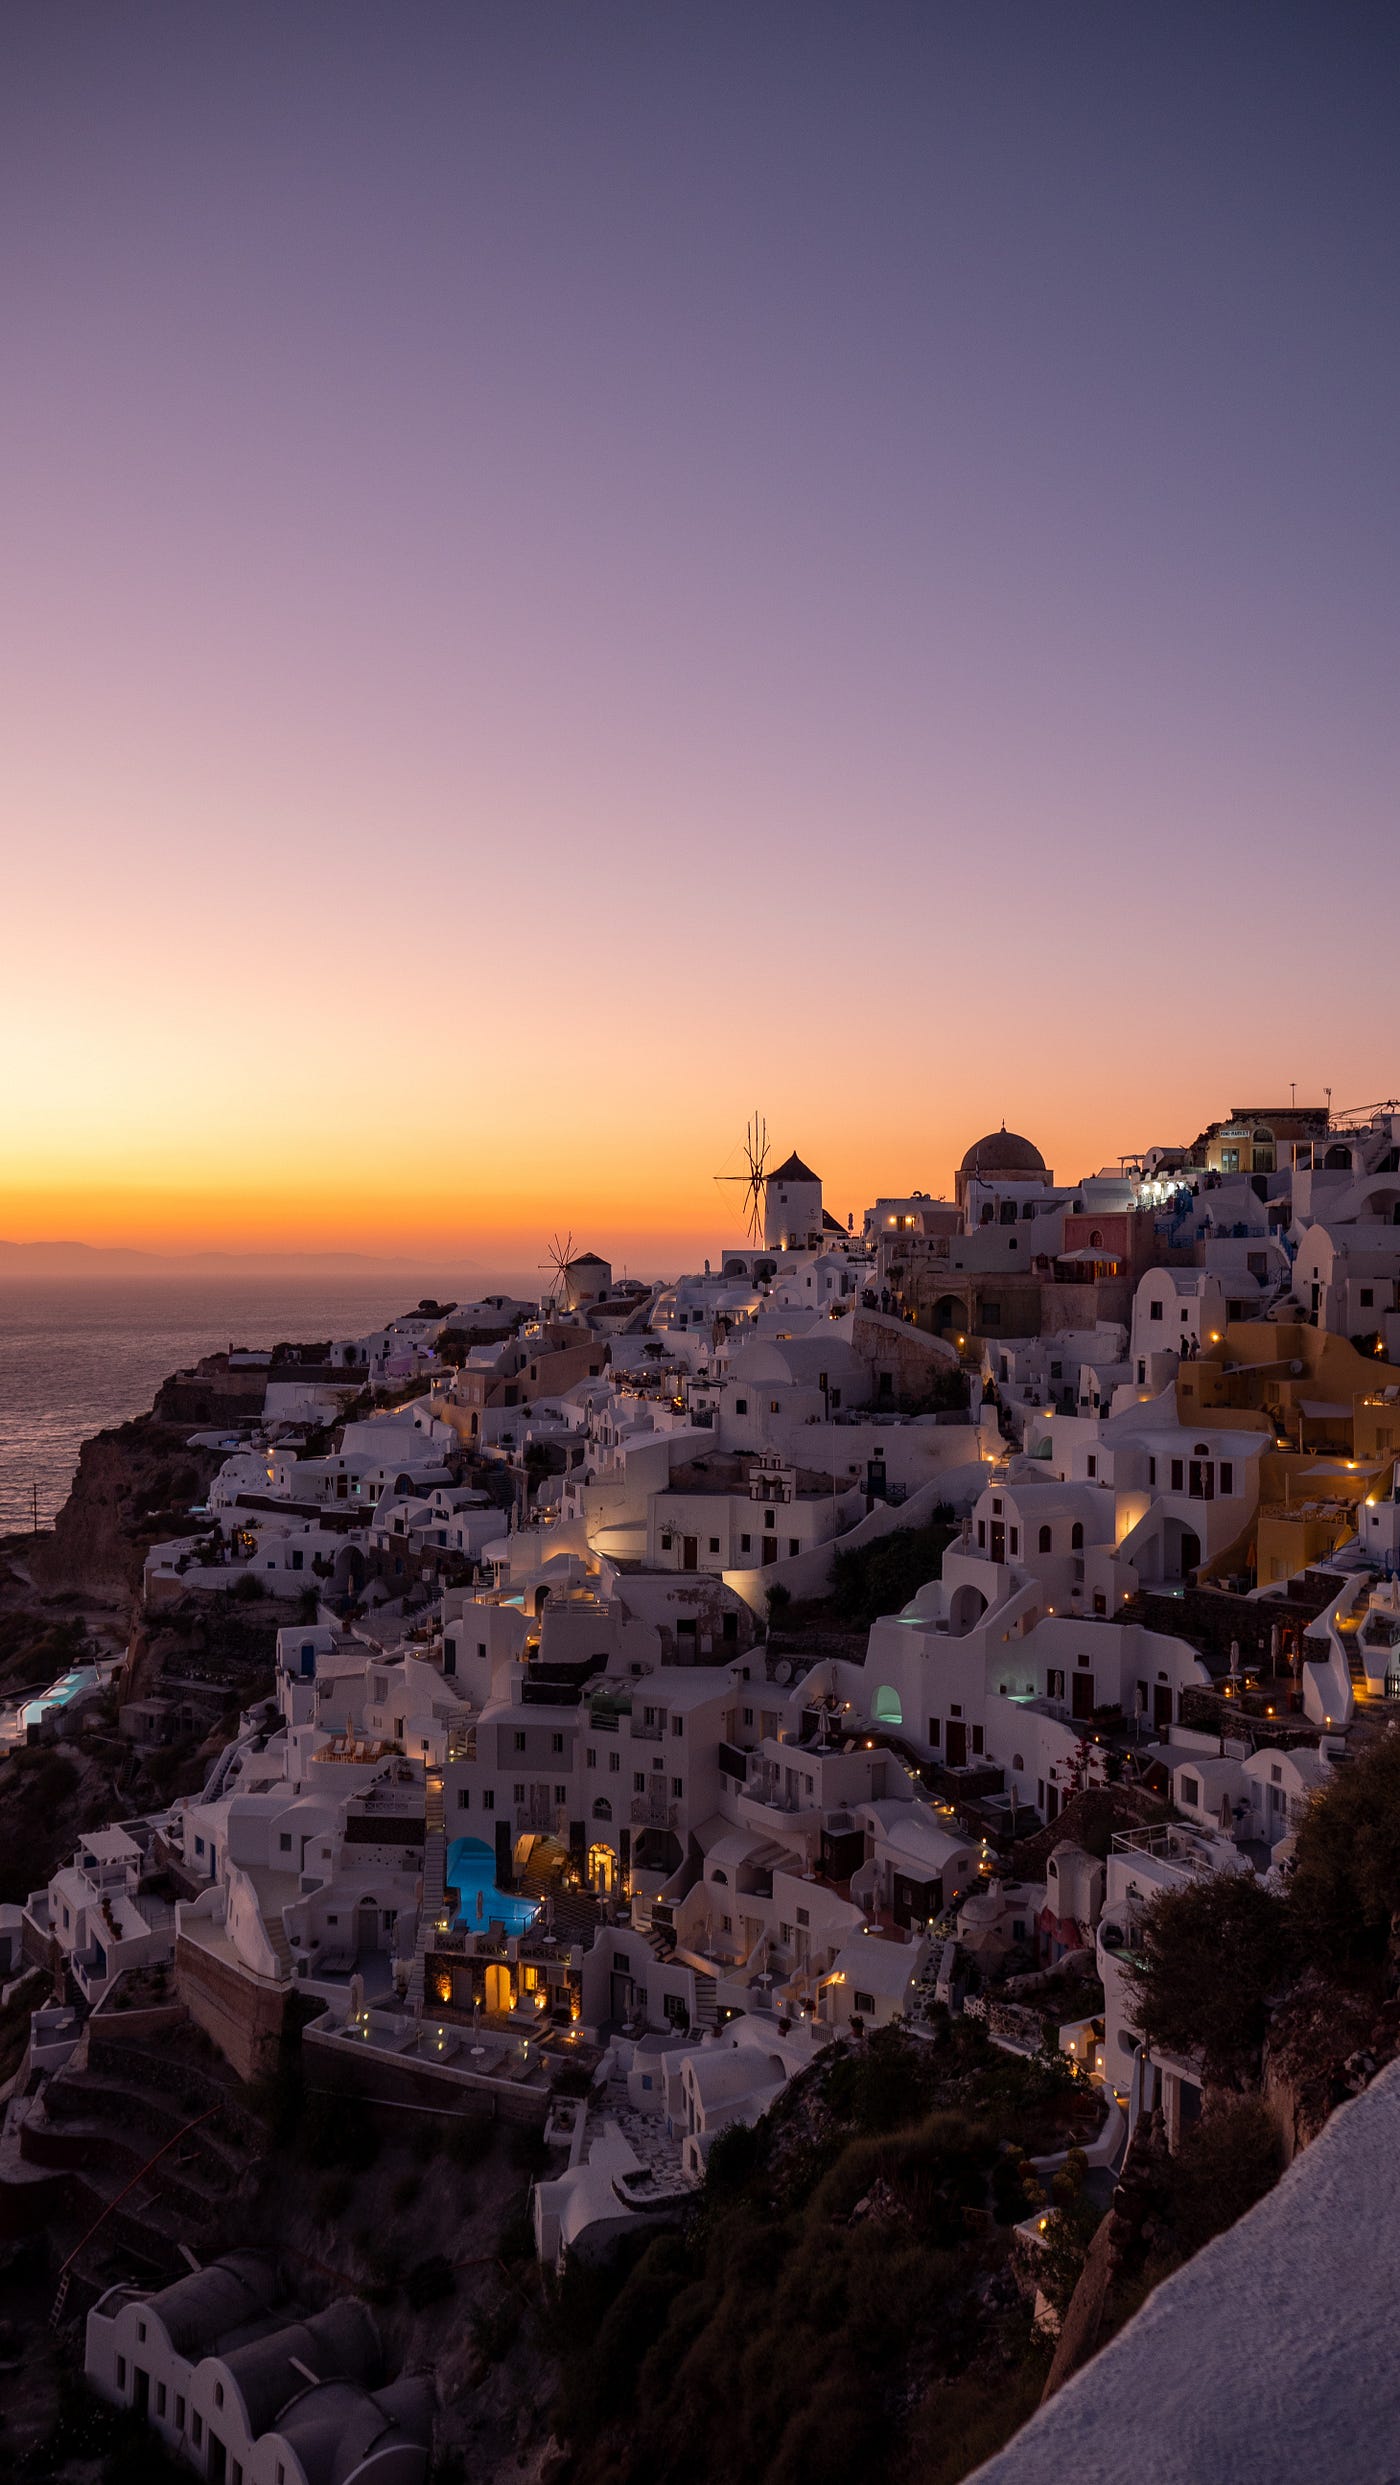 Which beach in Santorini is famous for its black volcanic sand?